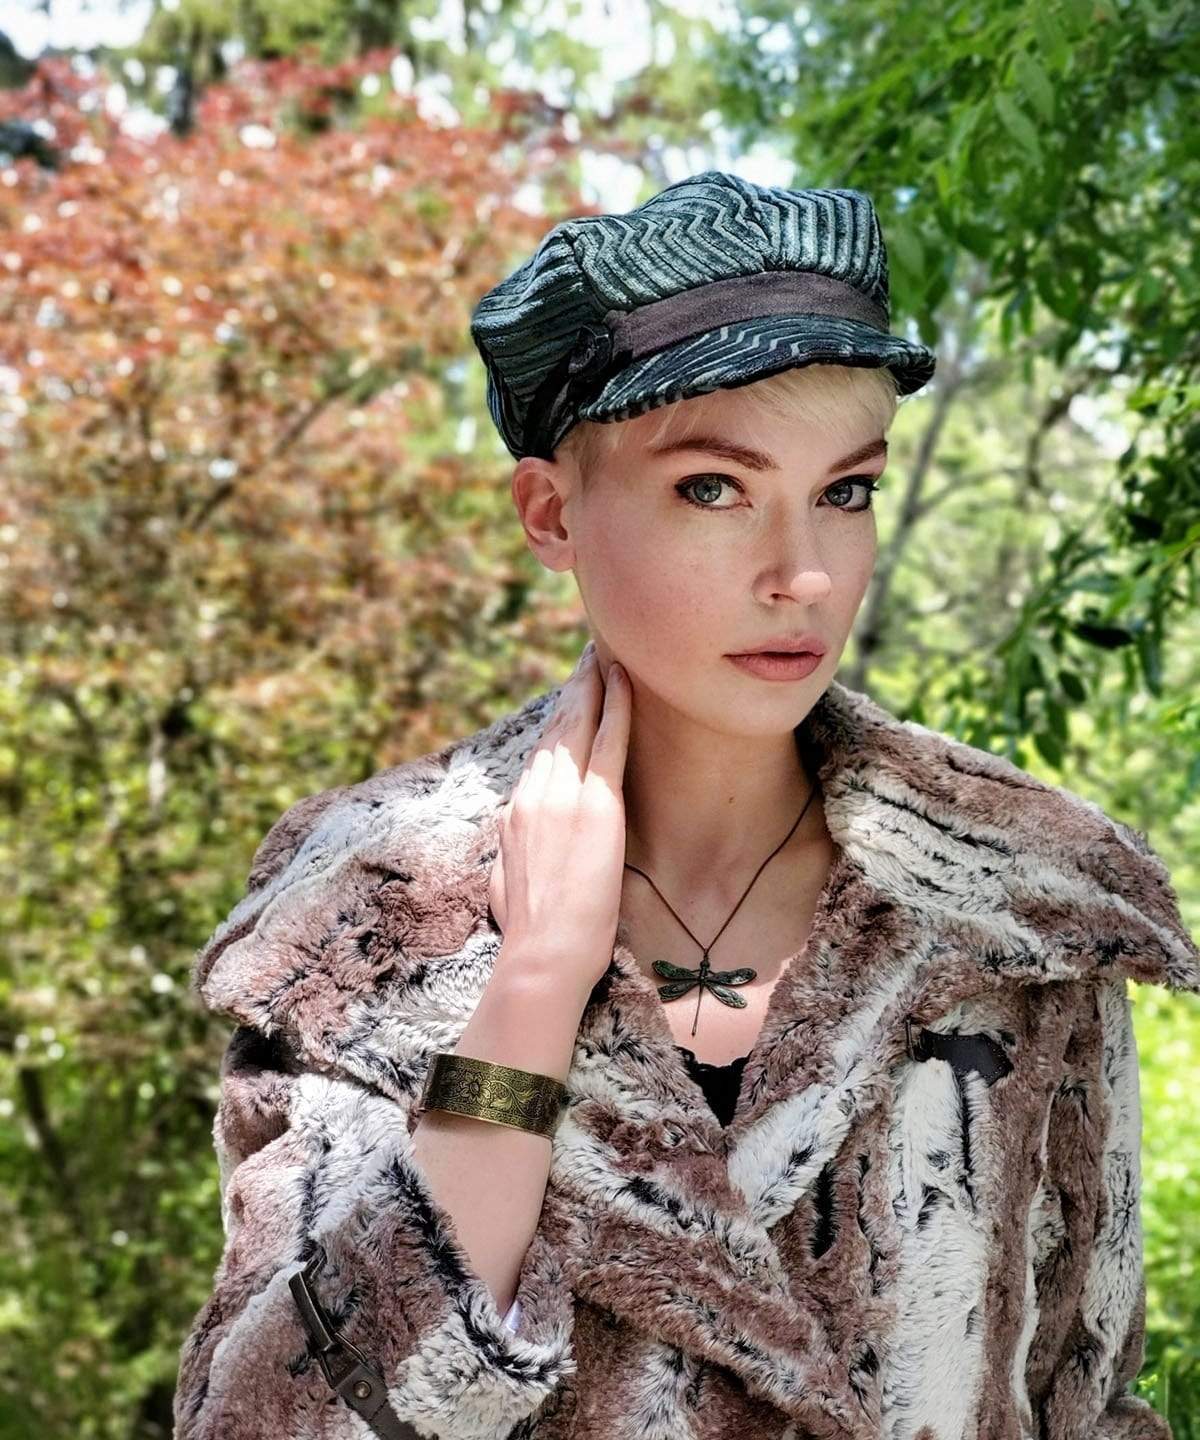 Model in a Valerie Newsboy style cap features the Dietrich Coat | Birch Brown and Ivory Faux Fur Pea Coat | Featuring Buckle Clasps | Handmade in Seattle, WA | Pandemonium Millinery